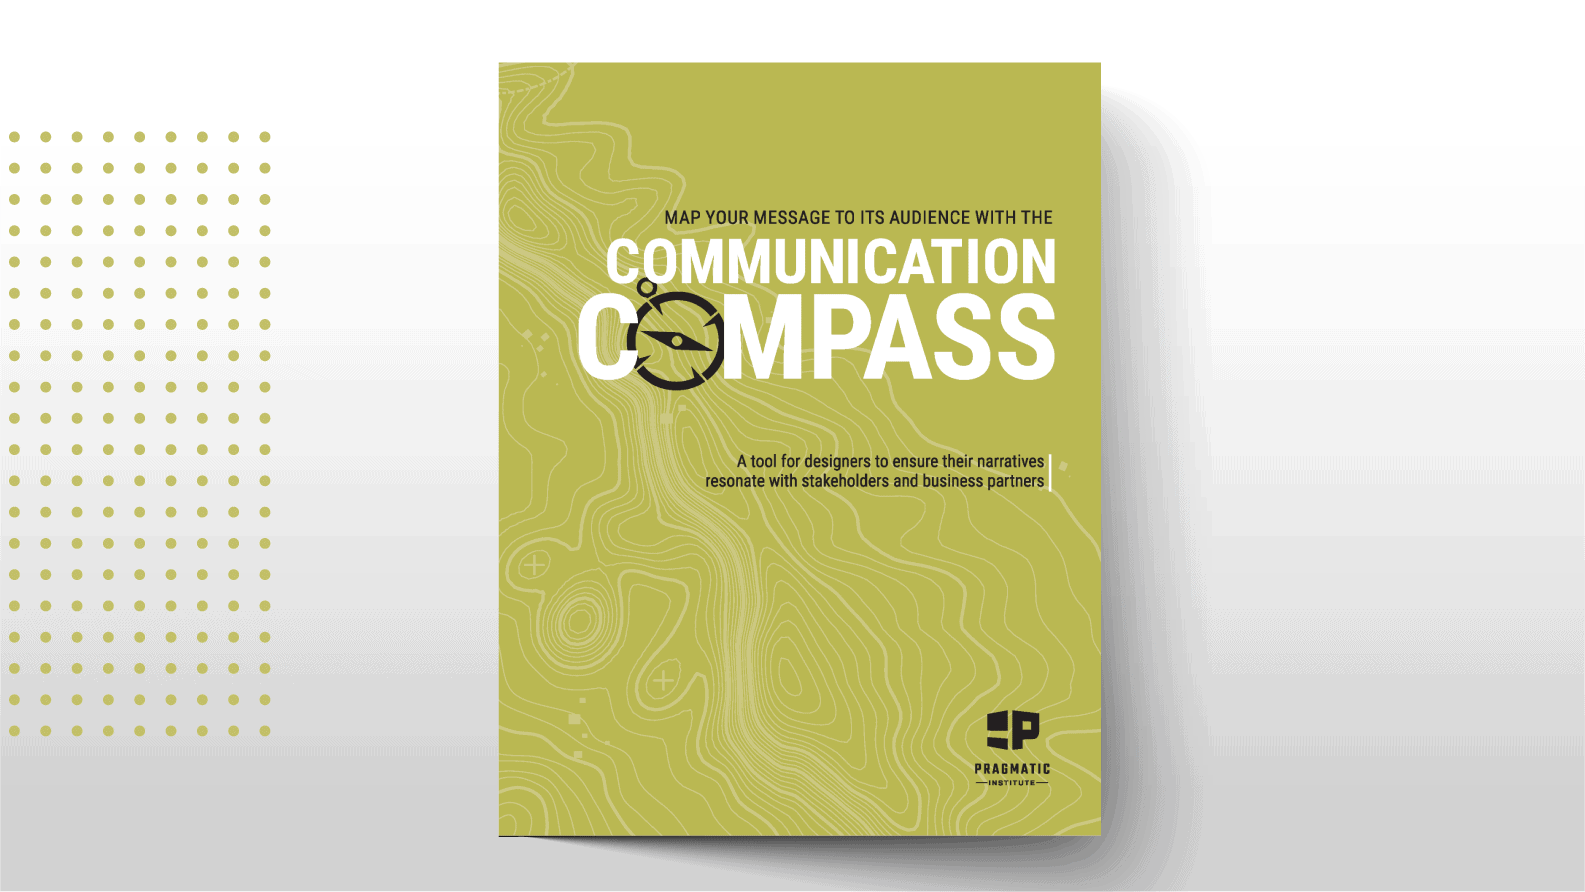 Map Your Message to Its Audience with the Communication Compass